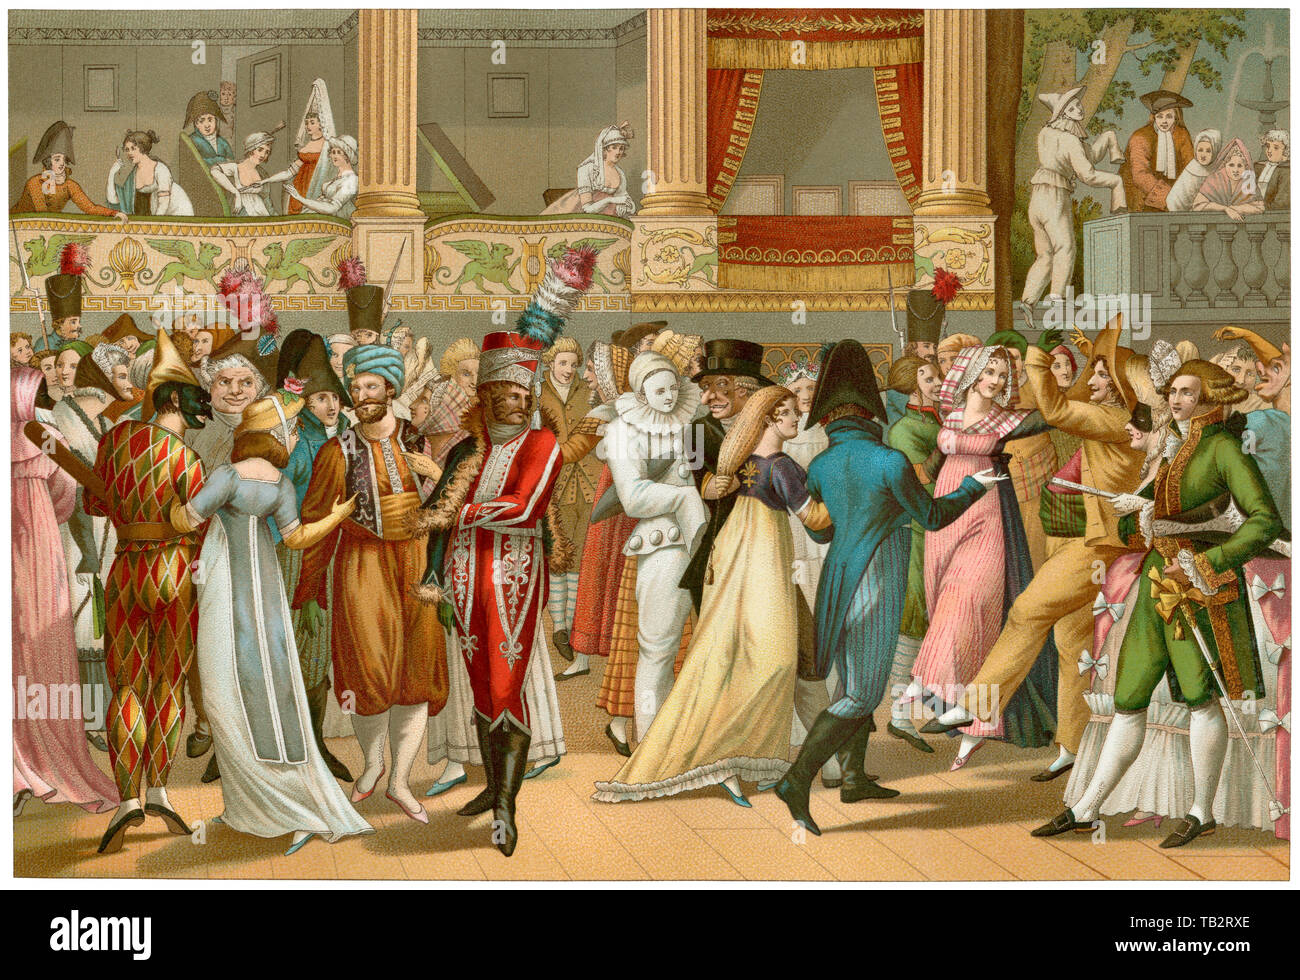 Costume ball at the Opera, Paris, early 1800s. Color lithograph Stock Photo